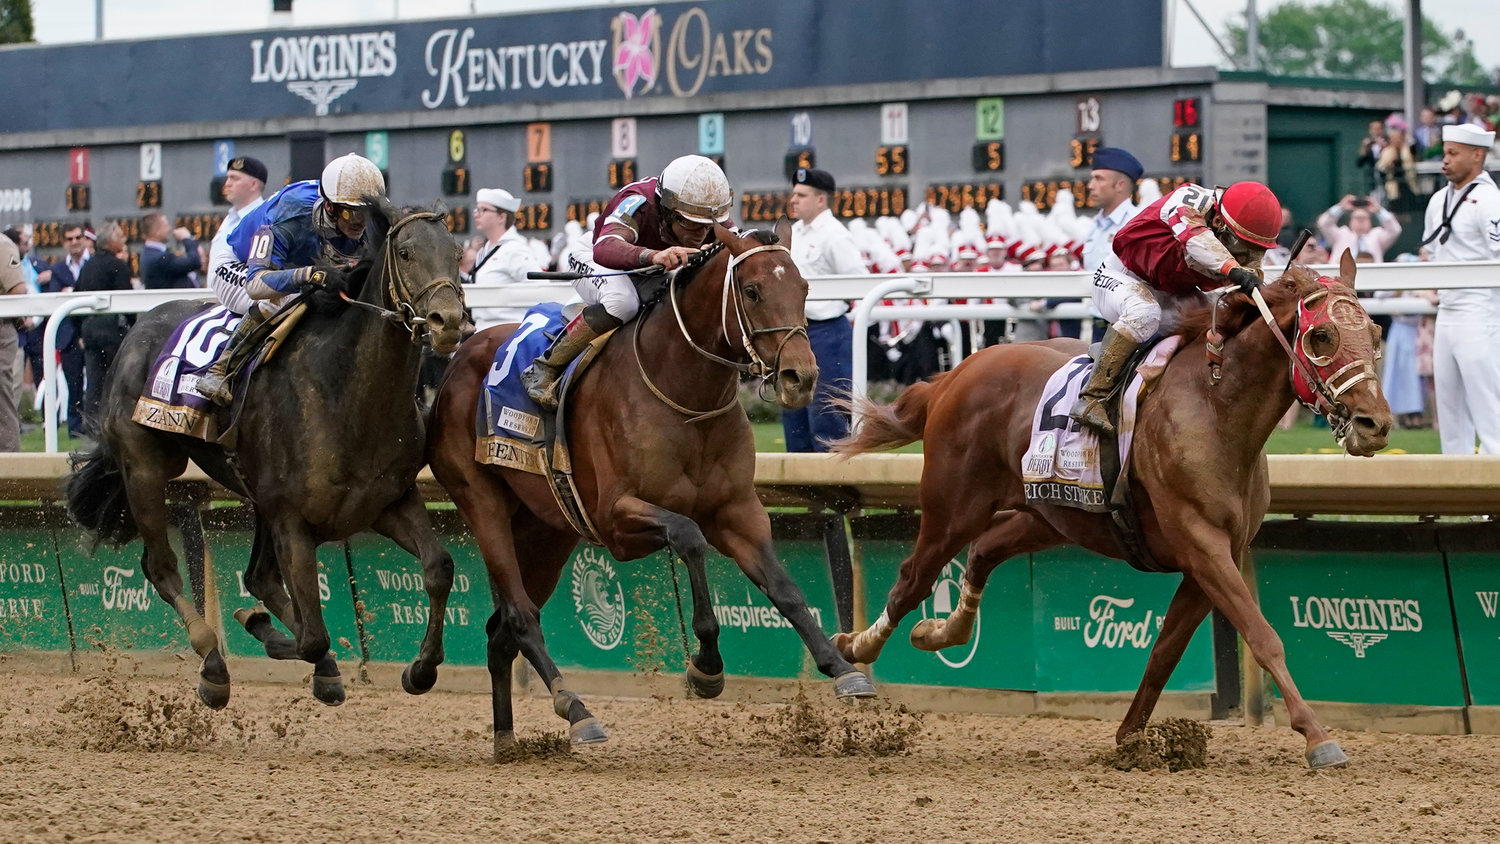 Rich Strike, right, with Sonny Leon aboard, leads the field to win the 148th running of the Kentucky Derby on Saturday in Louisville, Ky.